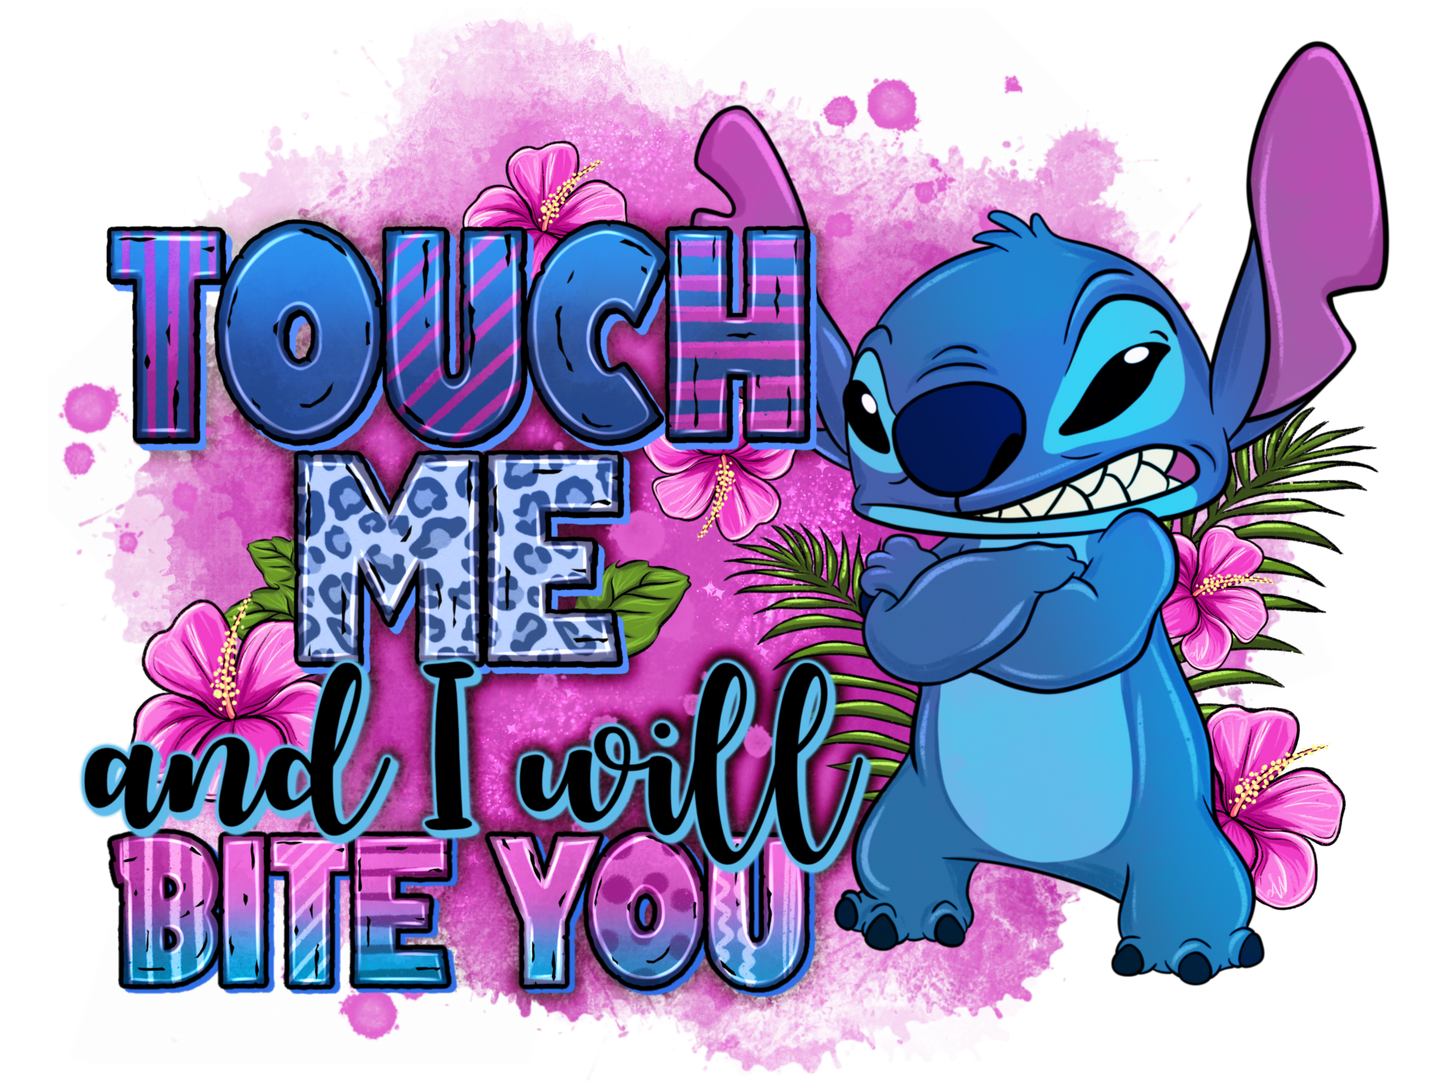 TOUCH ME AND I WILL BITE YOU